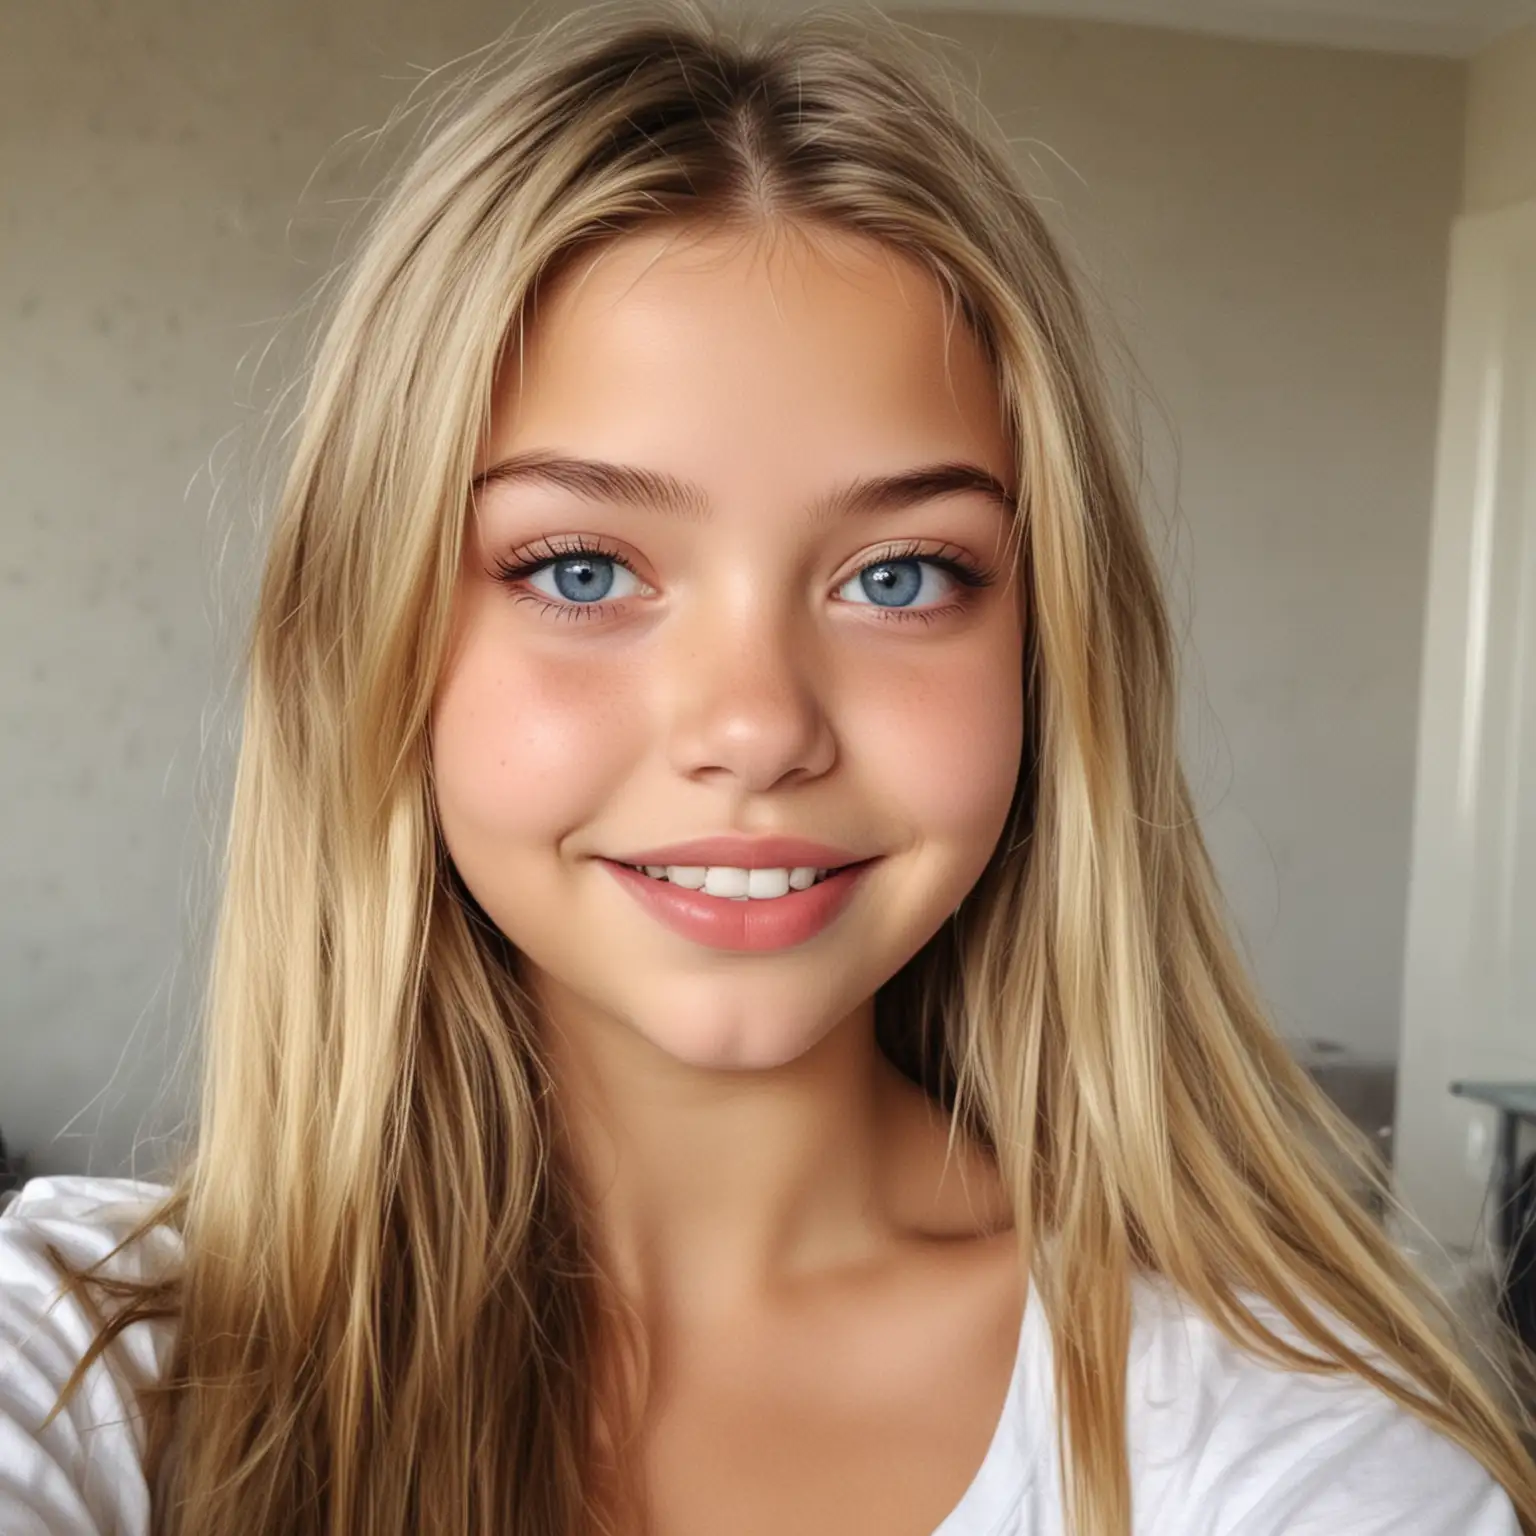 Excited Blonde French Girl Selfie Youthful Pose with Cute Smile